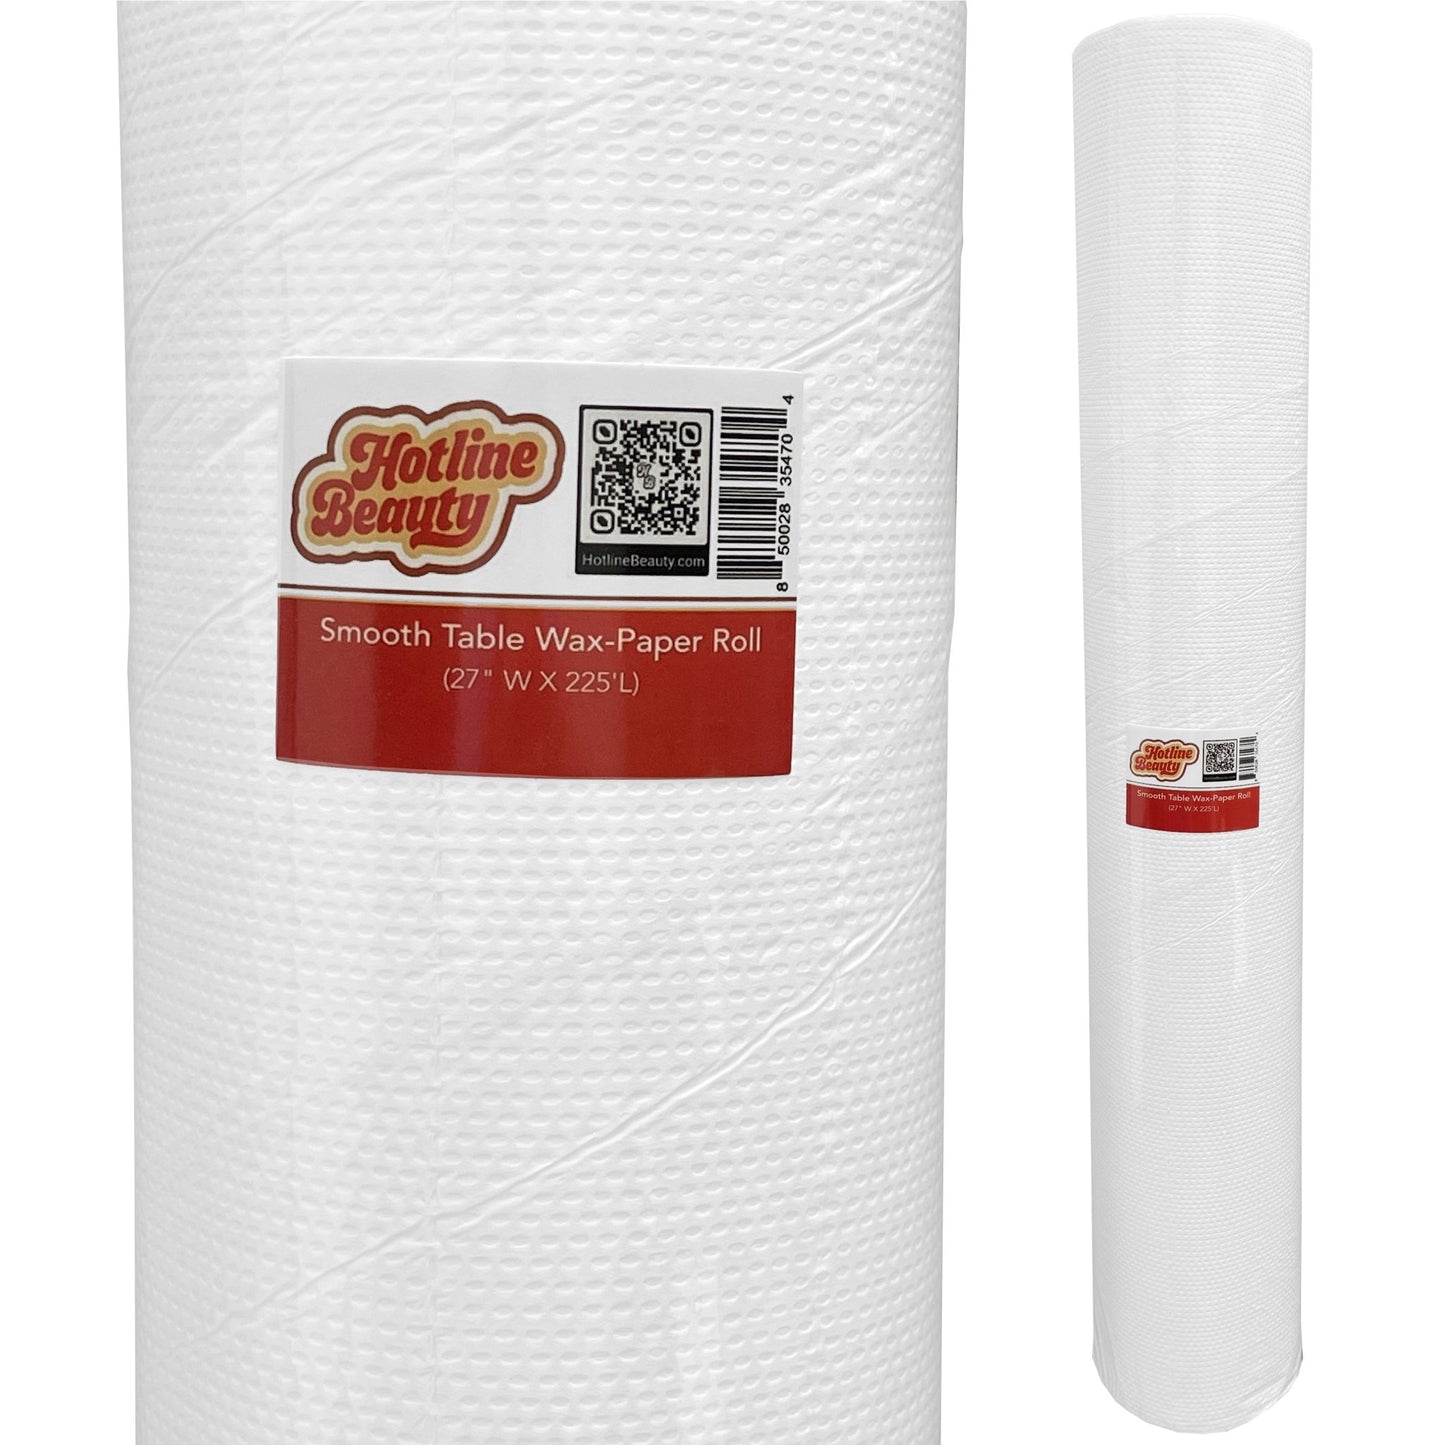 Smooth Table Wax-Paper Roll | 27" W X 225'L | HOTLINE BEAUTY - SH Salons